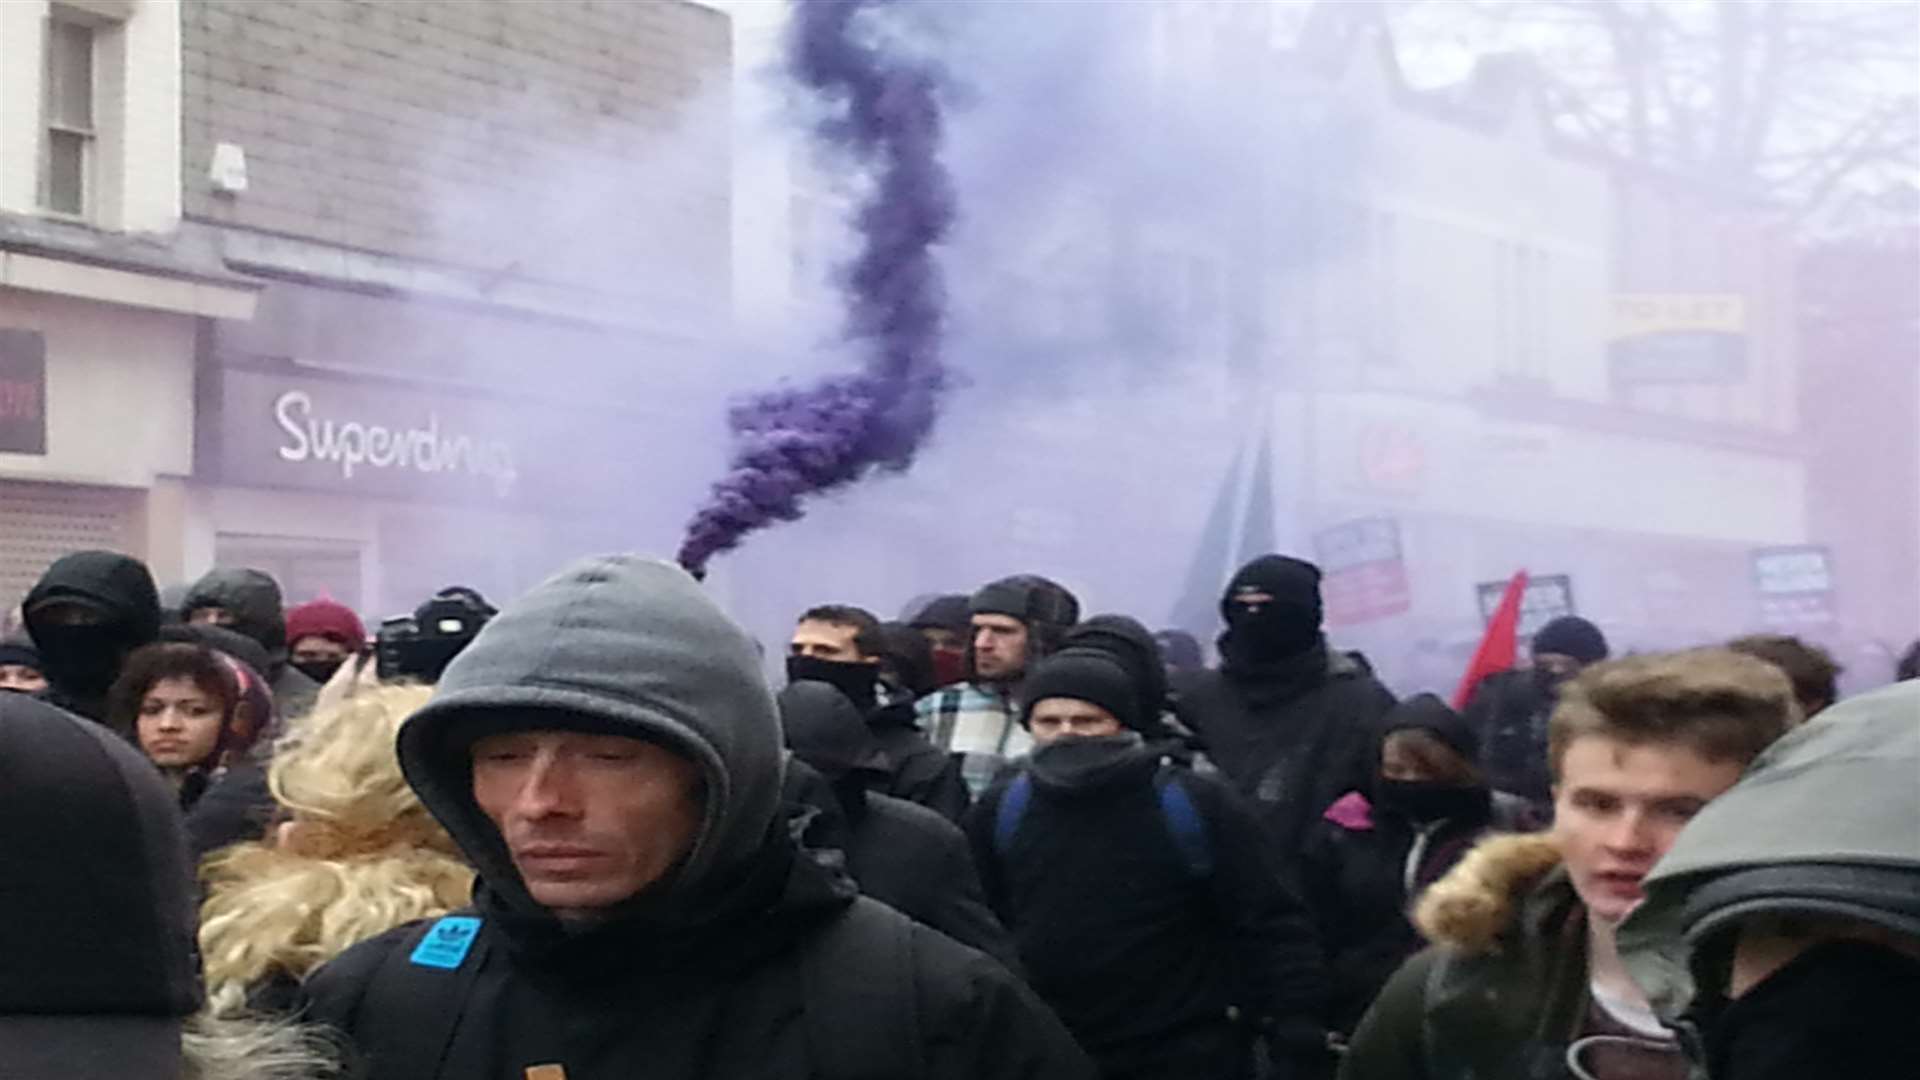 Left and right wing groups clashed in Dover